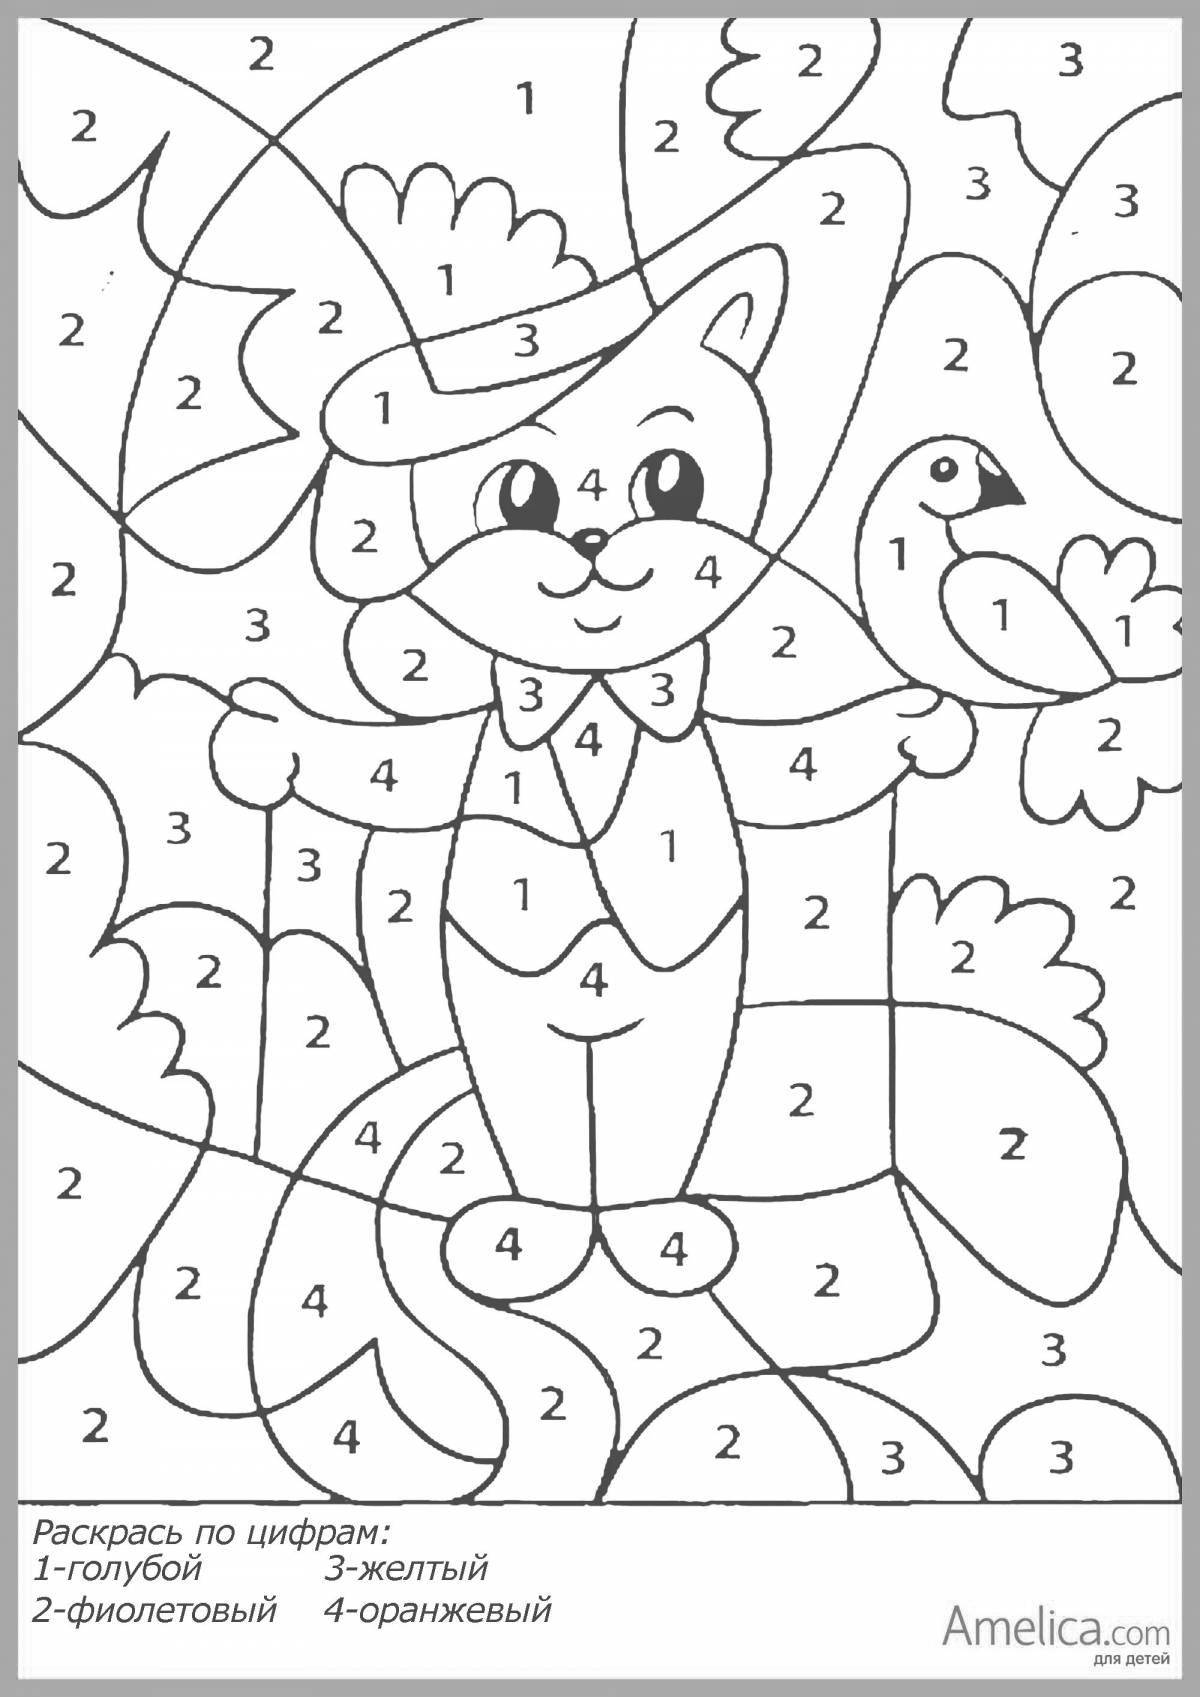 Bright coloring by numbers up to 5 for kids